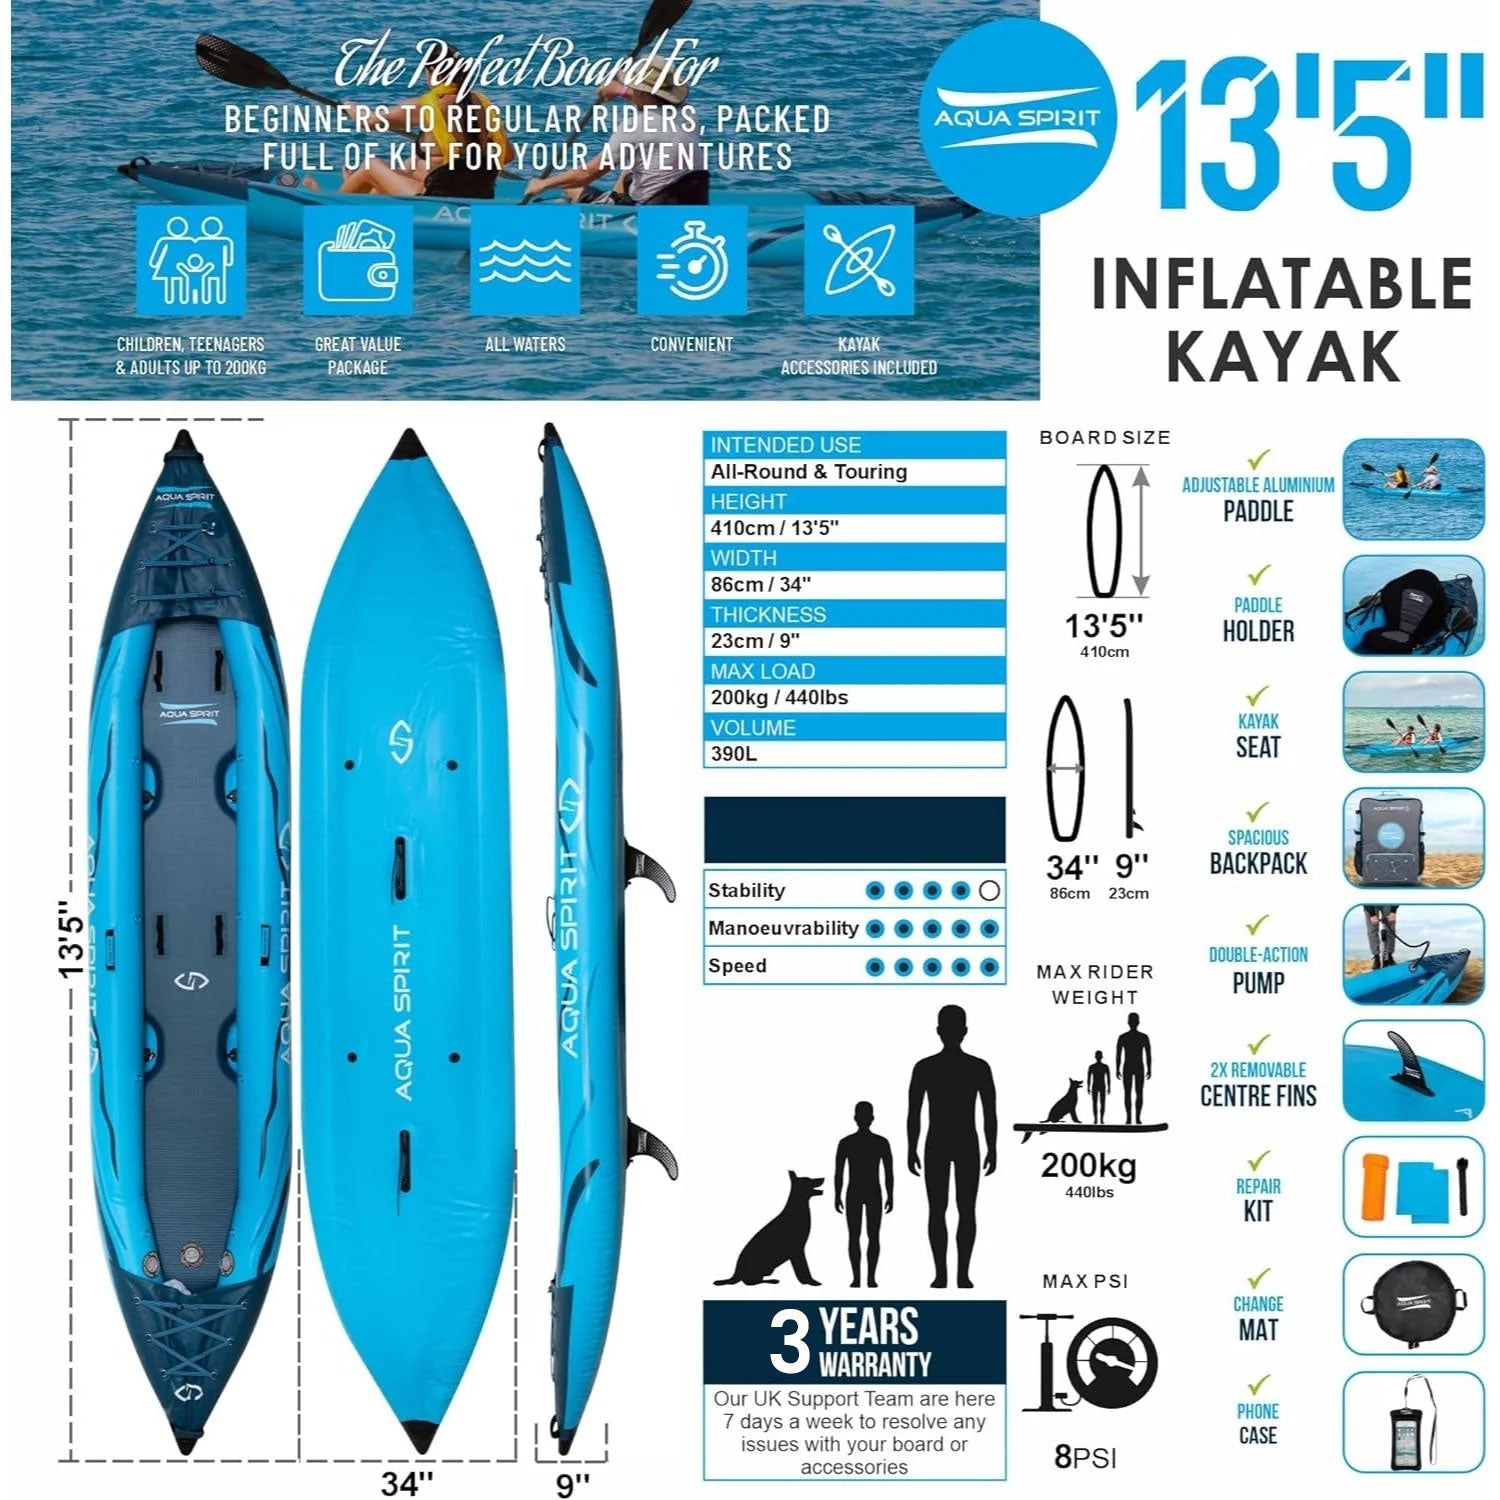 Aqua Spirit Inflatable Kayak, 2 - Seater/1 - Seater Complete Kayak Kit with Paddle, Backpack, Double - Action Pump and more accessories/Adult Beginners/Experts, 13’5”/10'5” - 3 Year Warranty - Aqua Spirit iSUPs UK